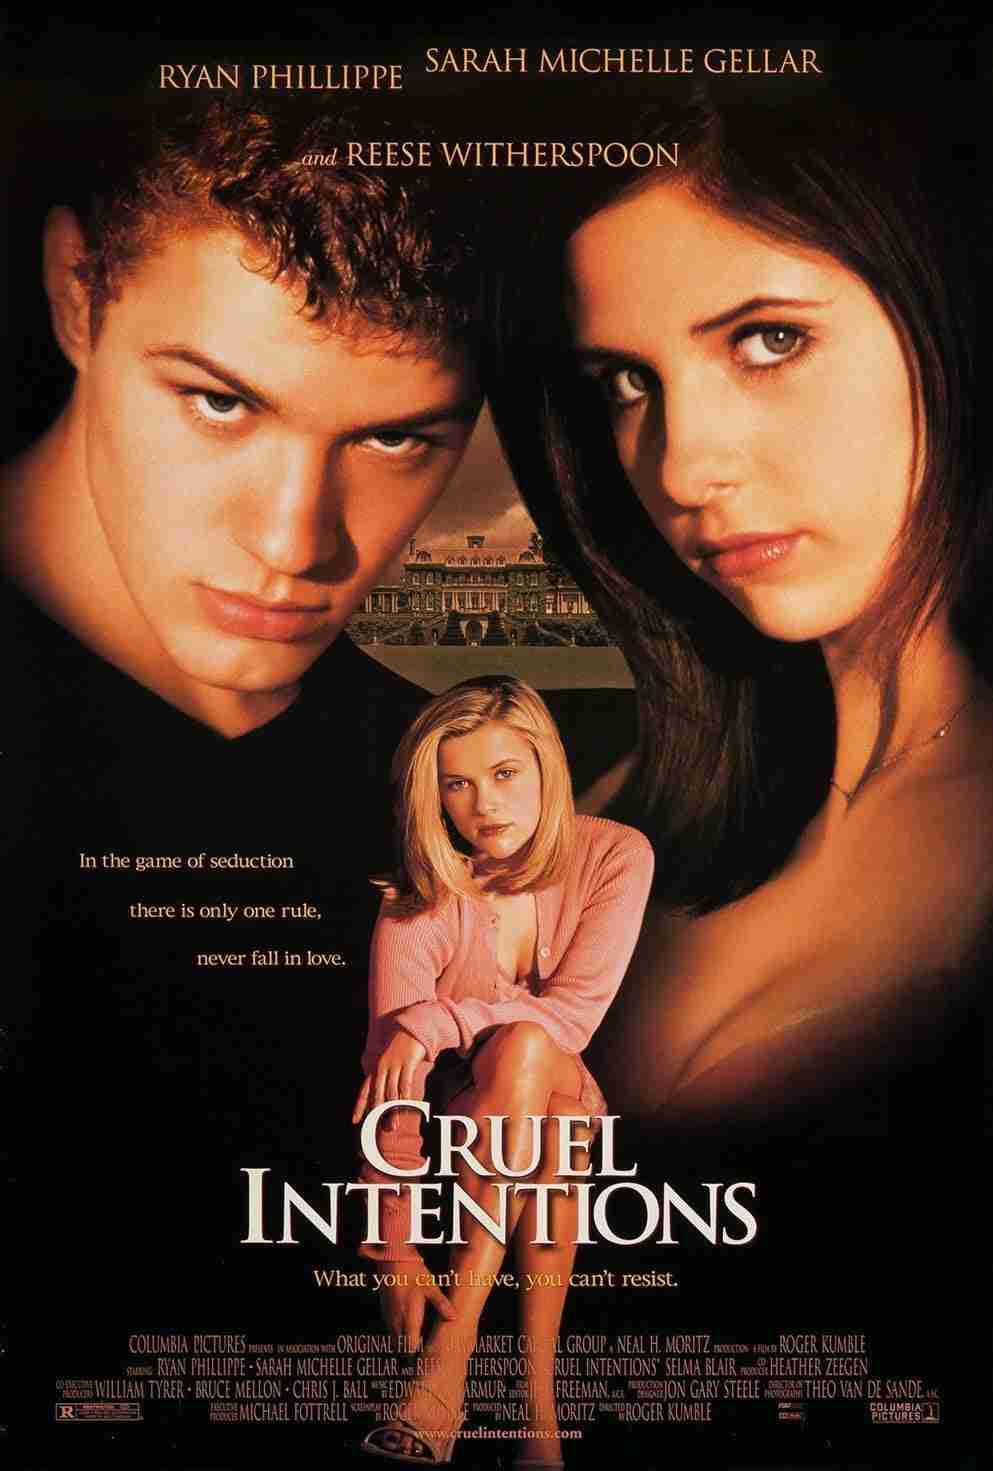 Cruel Intentions turns 25. The 10.5M teen romantic drama film received mixed reviews but was a box office success grossing 38.3M domestically and 75.9M worldwide